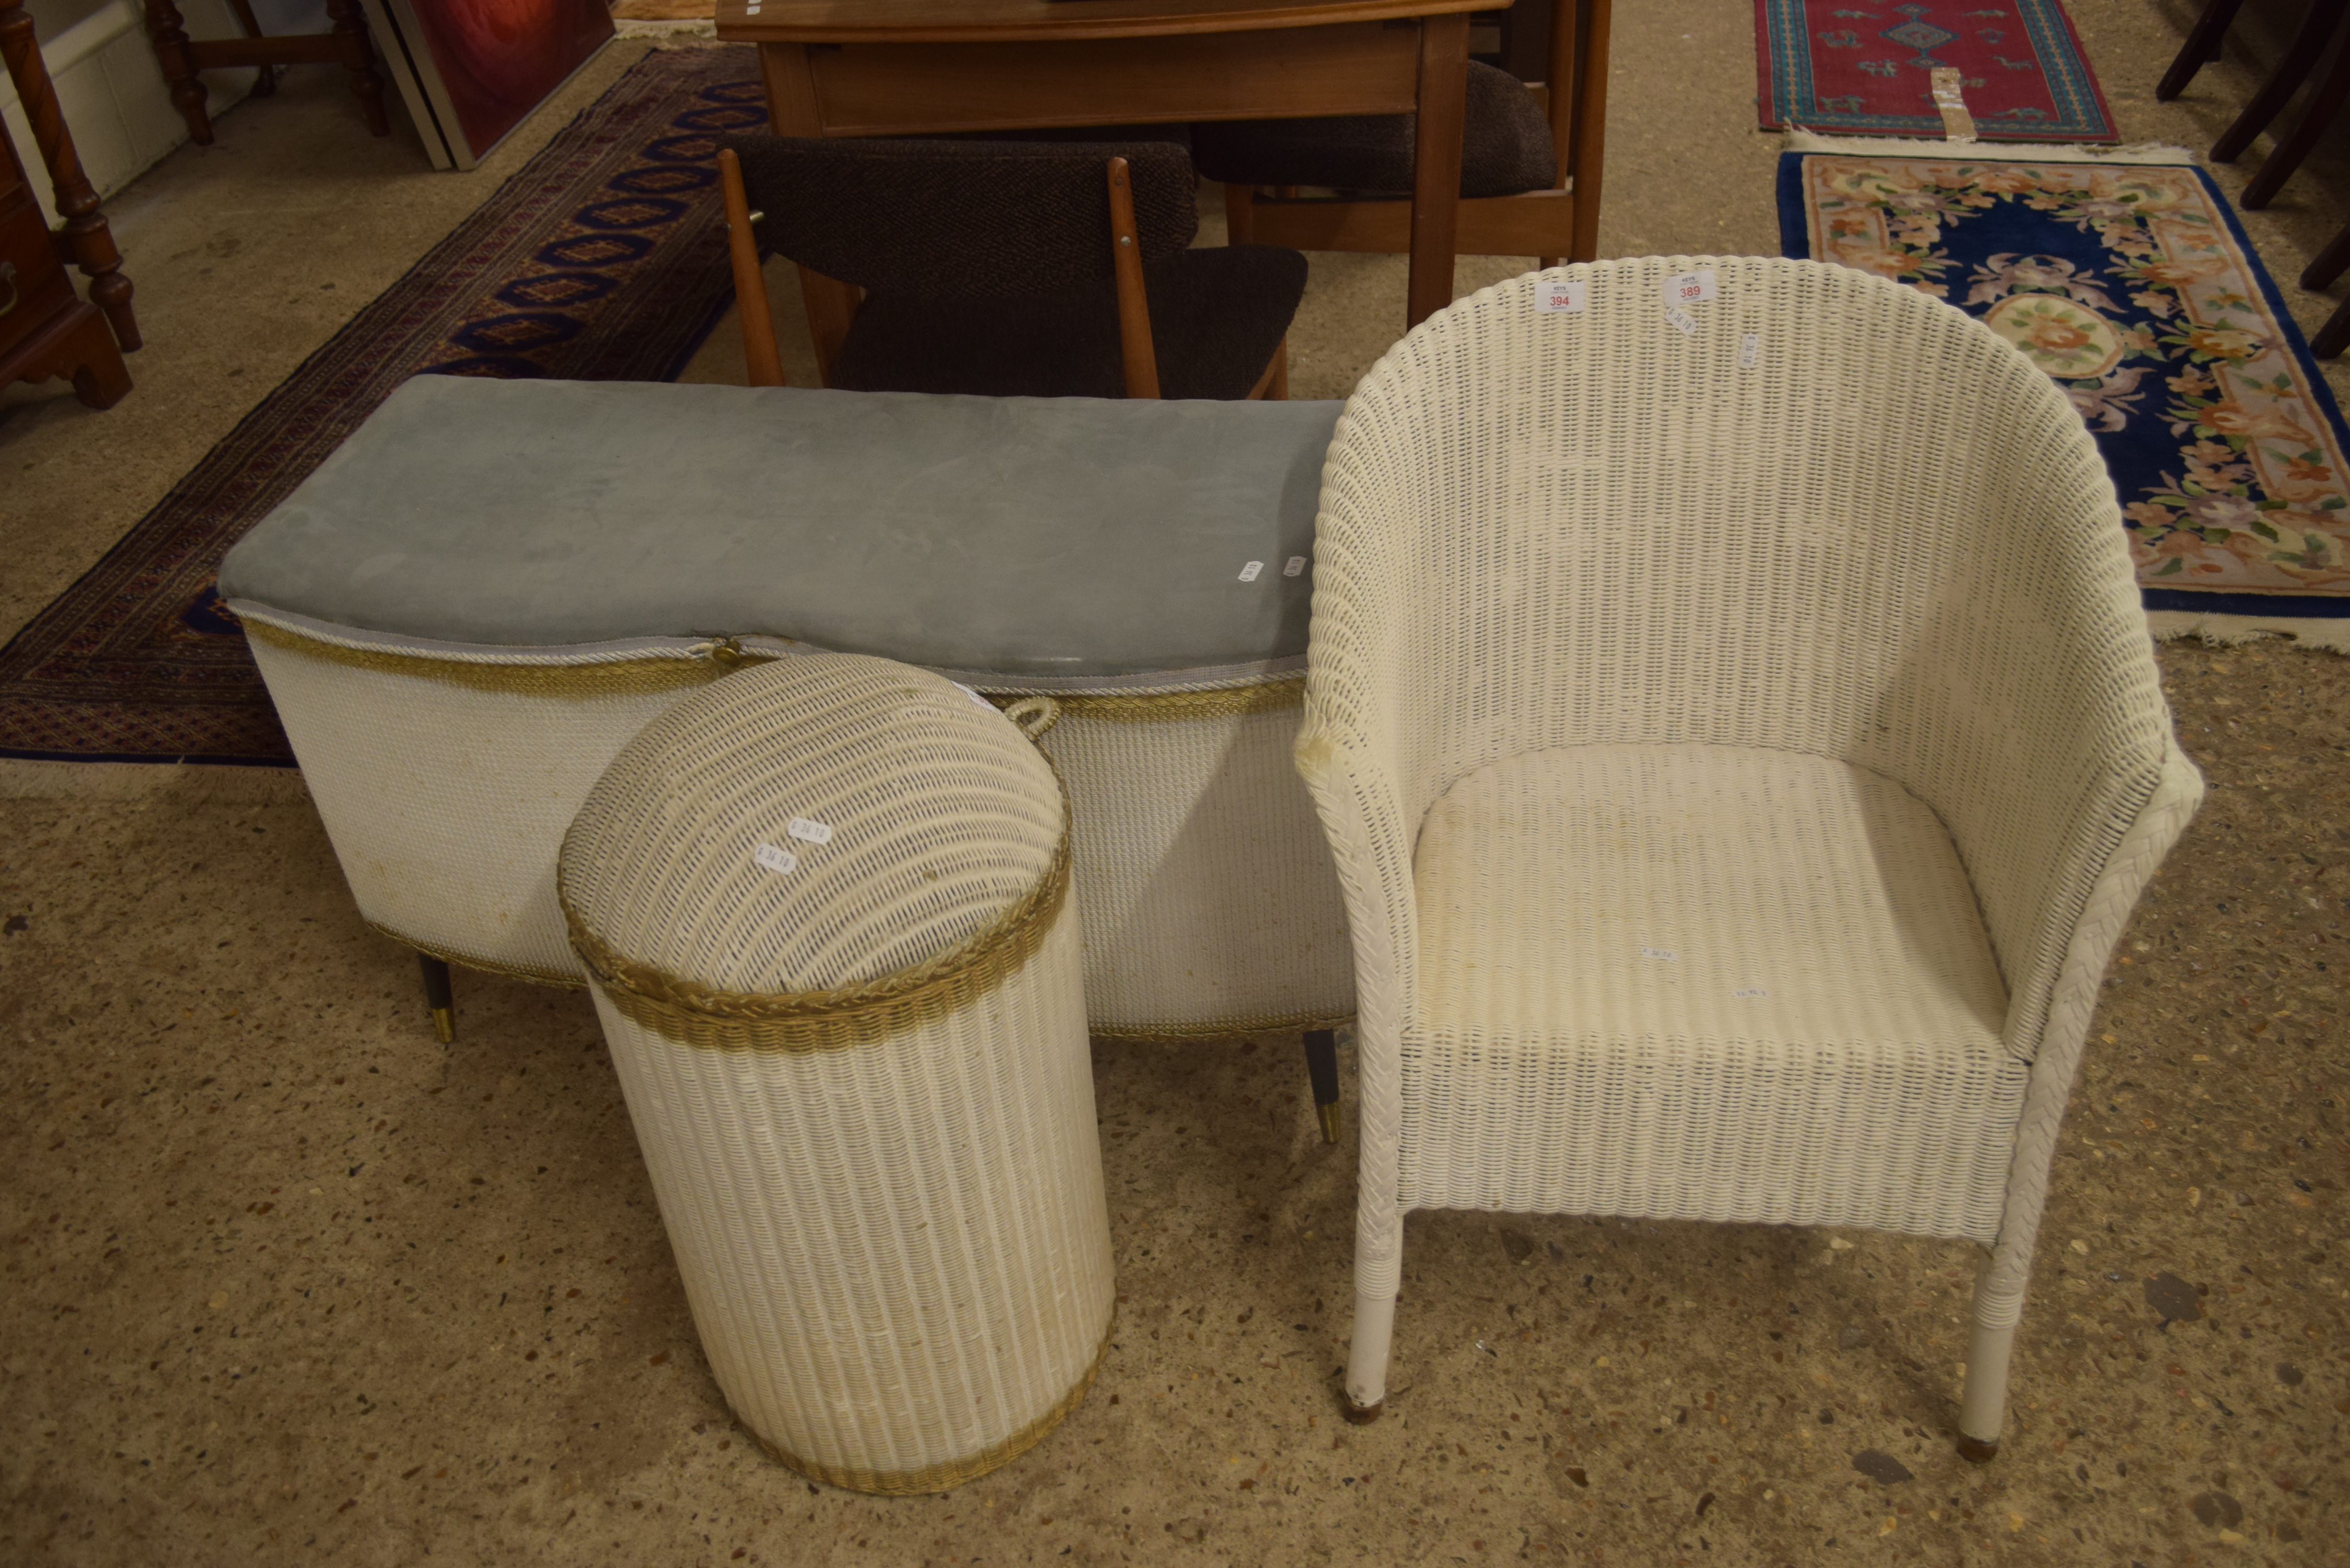 LLOYD LOOM STYLE WARES COMPRISING CHAIR, OTTOMAN AND A LAUNDRY BASKET (3)